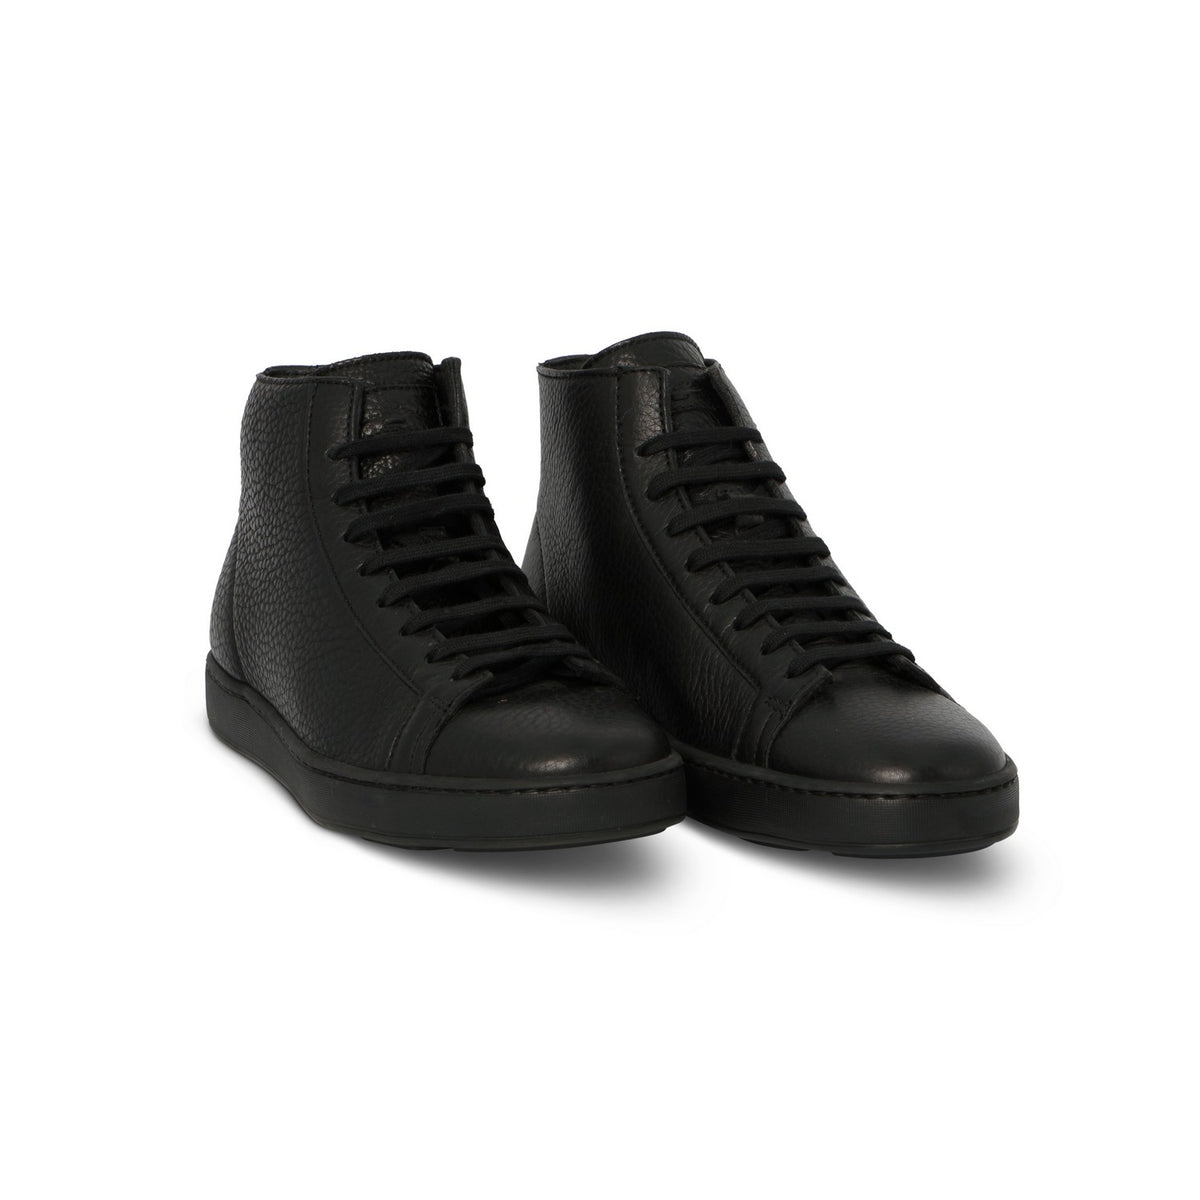 CLEANIC Higher Sneakers in Black Leather– La Maison Degand